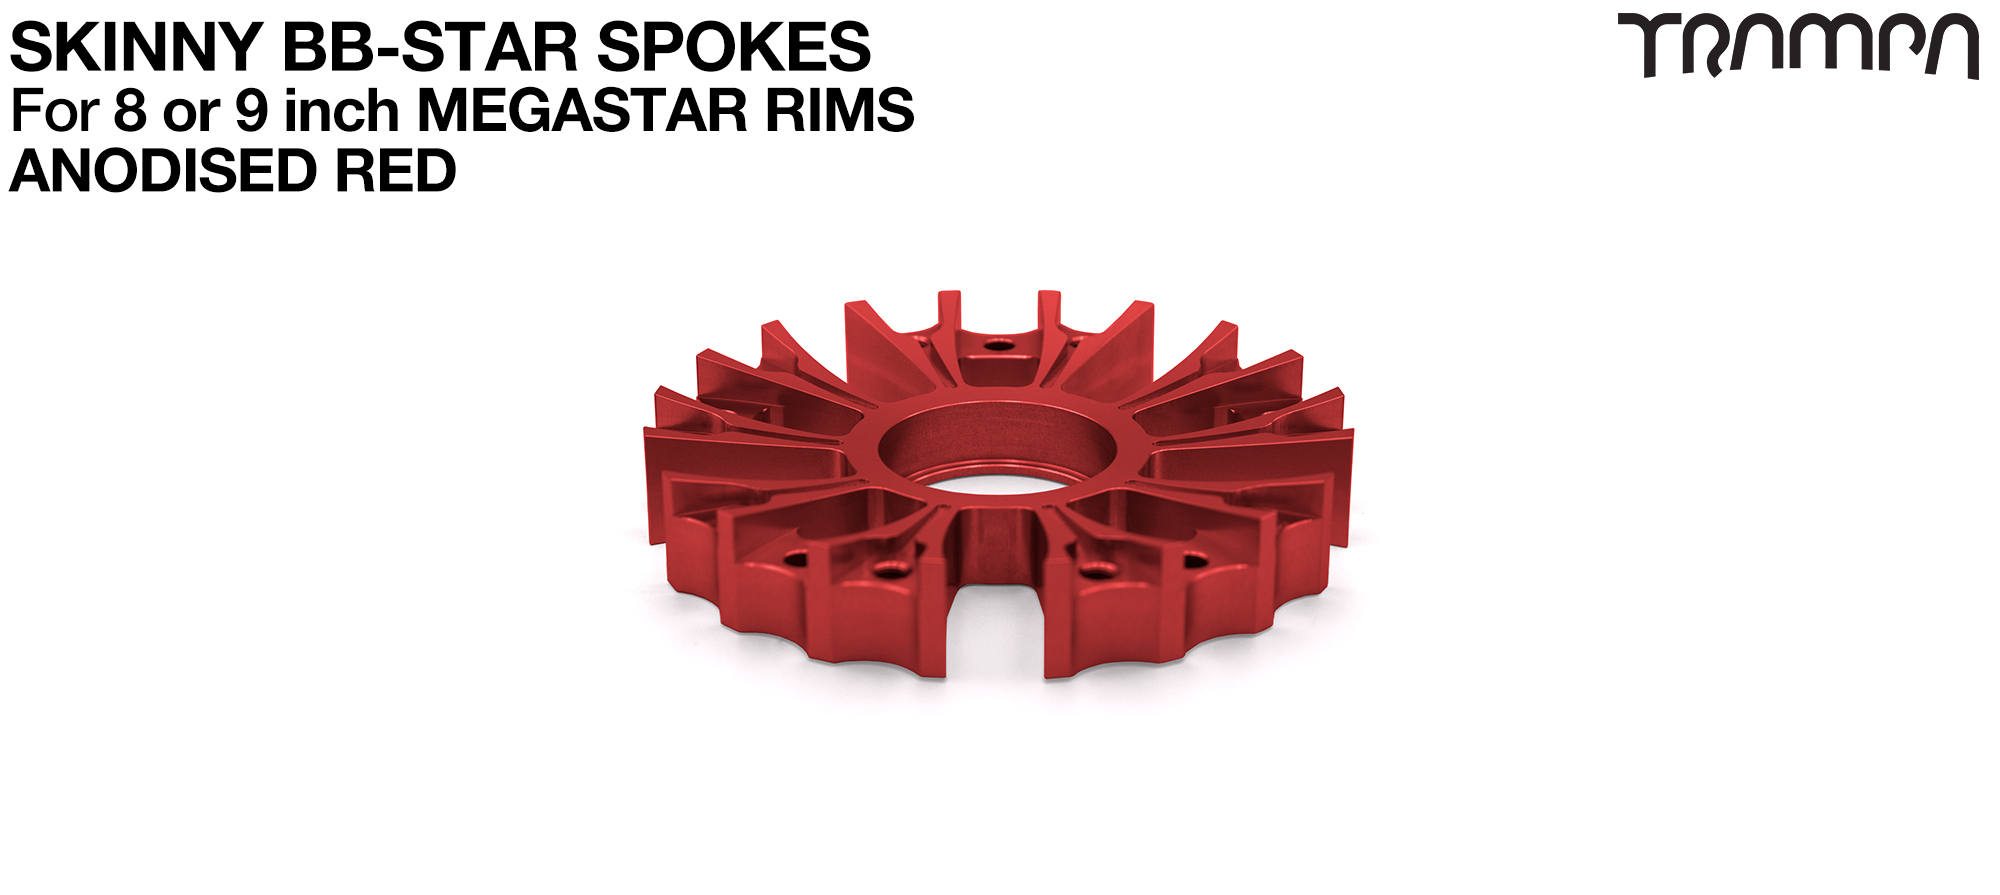 BBStar SKINNY Spoke for MEGASTAR 8 & 9 Rims - Extruded T6 Heat Treated & CNC Precision milled - RED